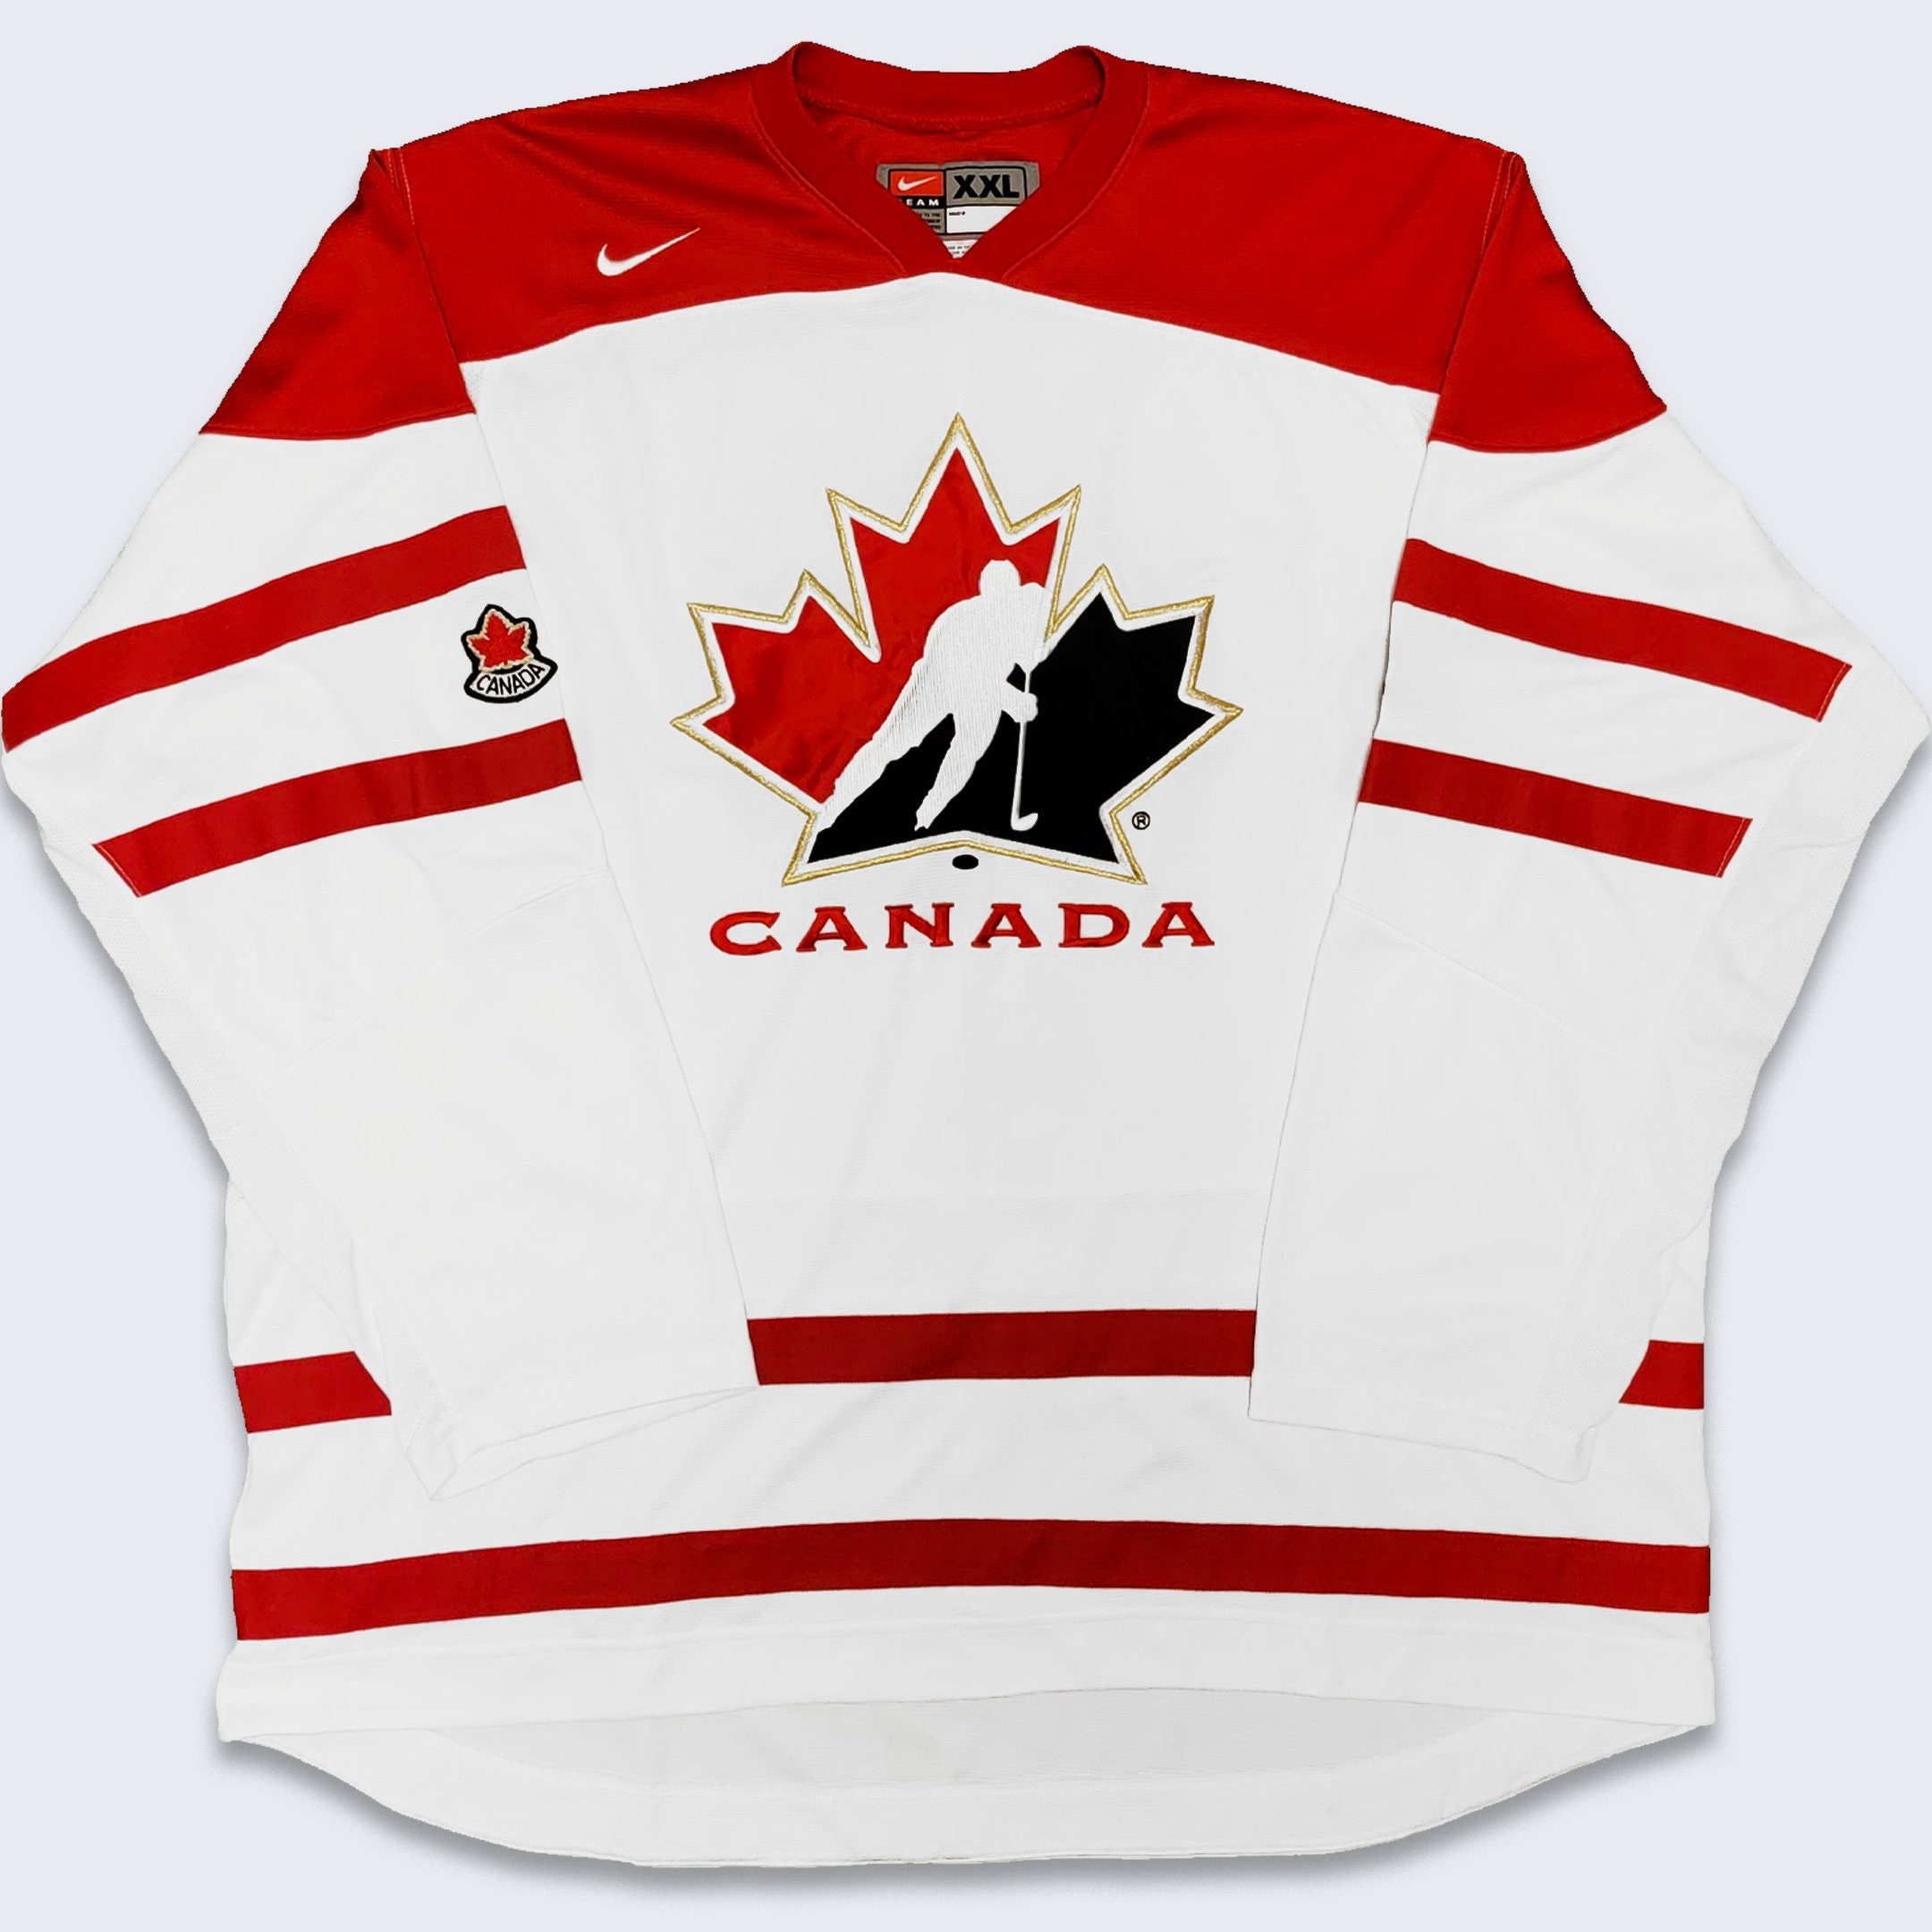 Canada Hockey Vintage Nike Jersey - White & Red Athletic Uniform Shirt -  Made in Canada - Size Men's XL - FREE SHIPPING